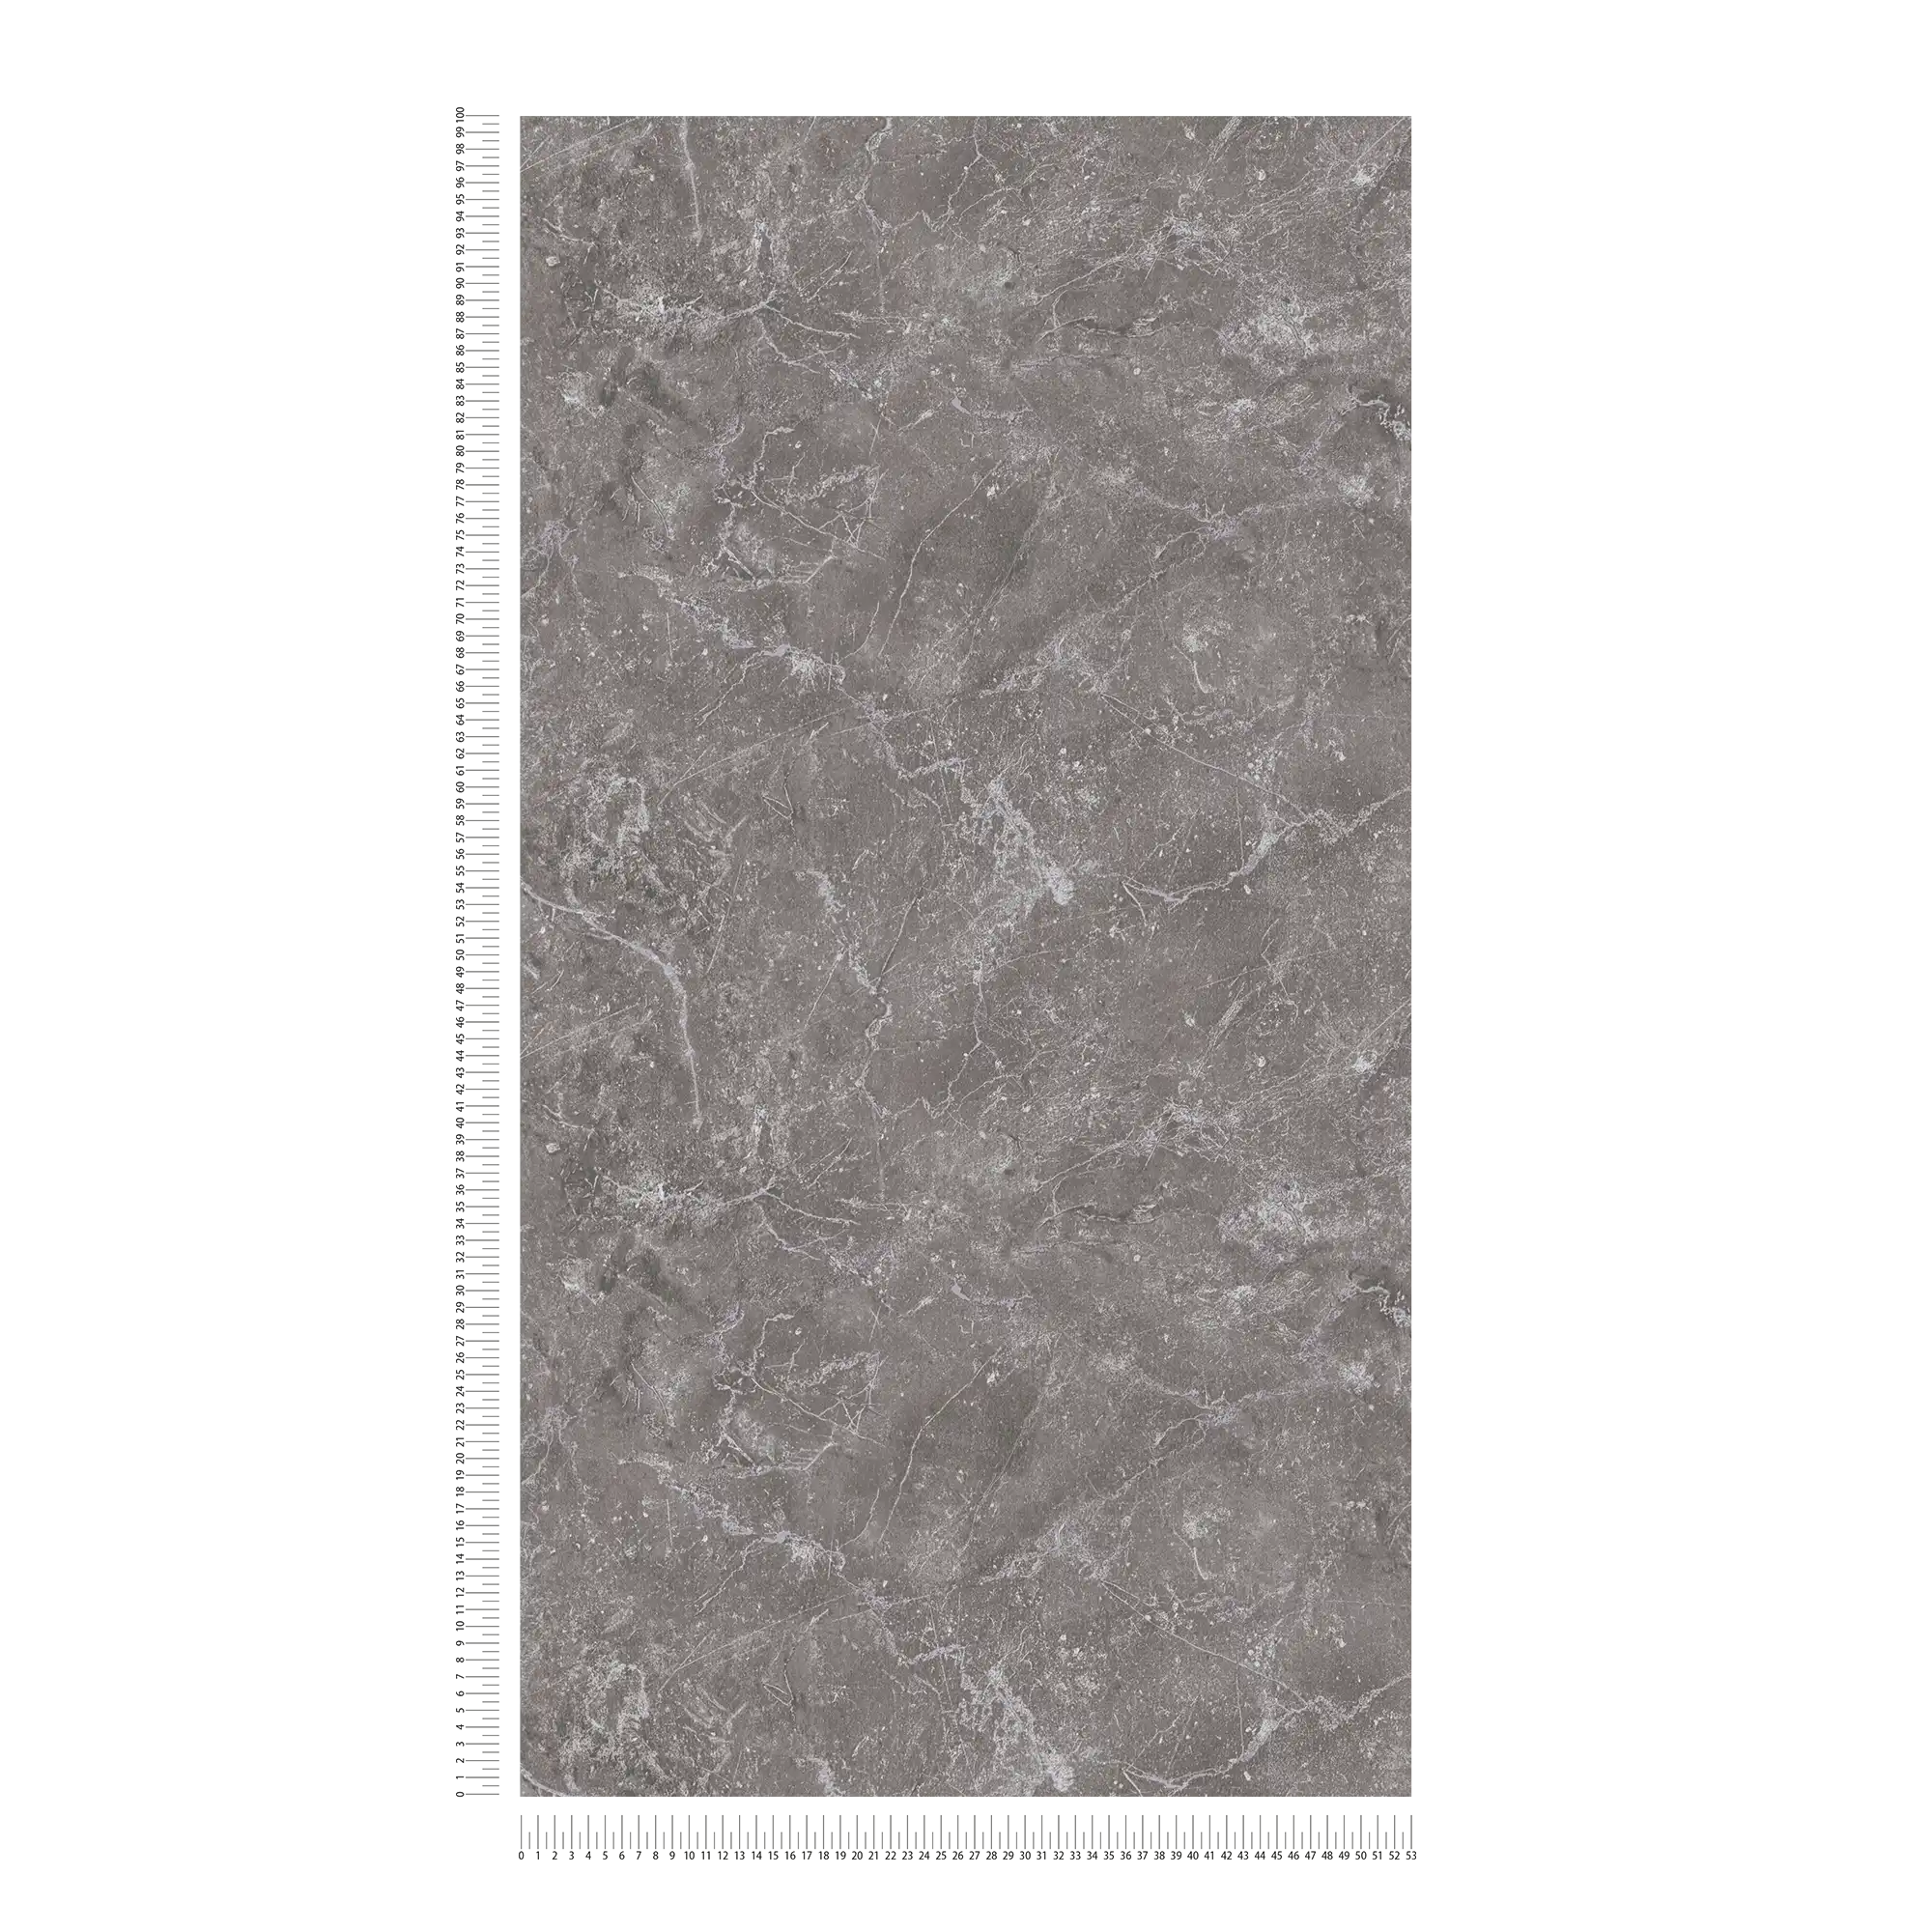             Marble wallpaper grey Design by MICHALSKY
        